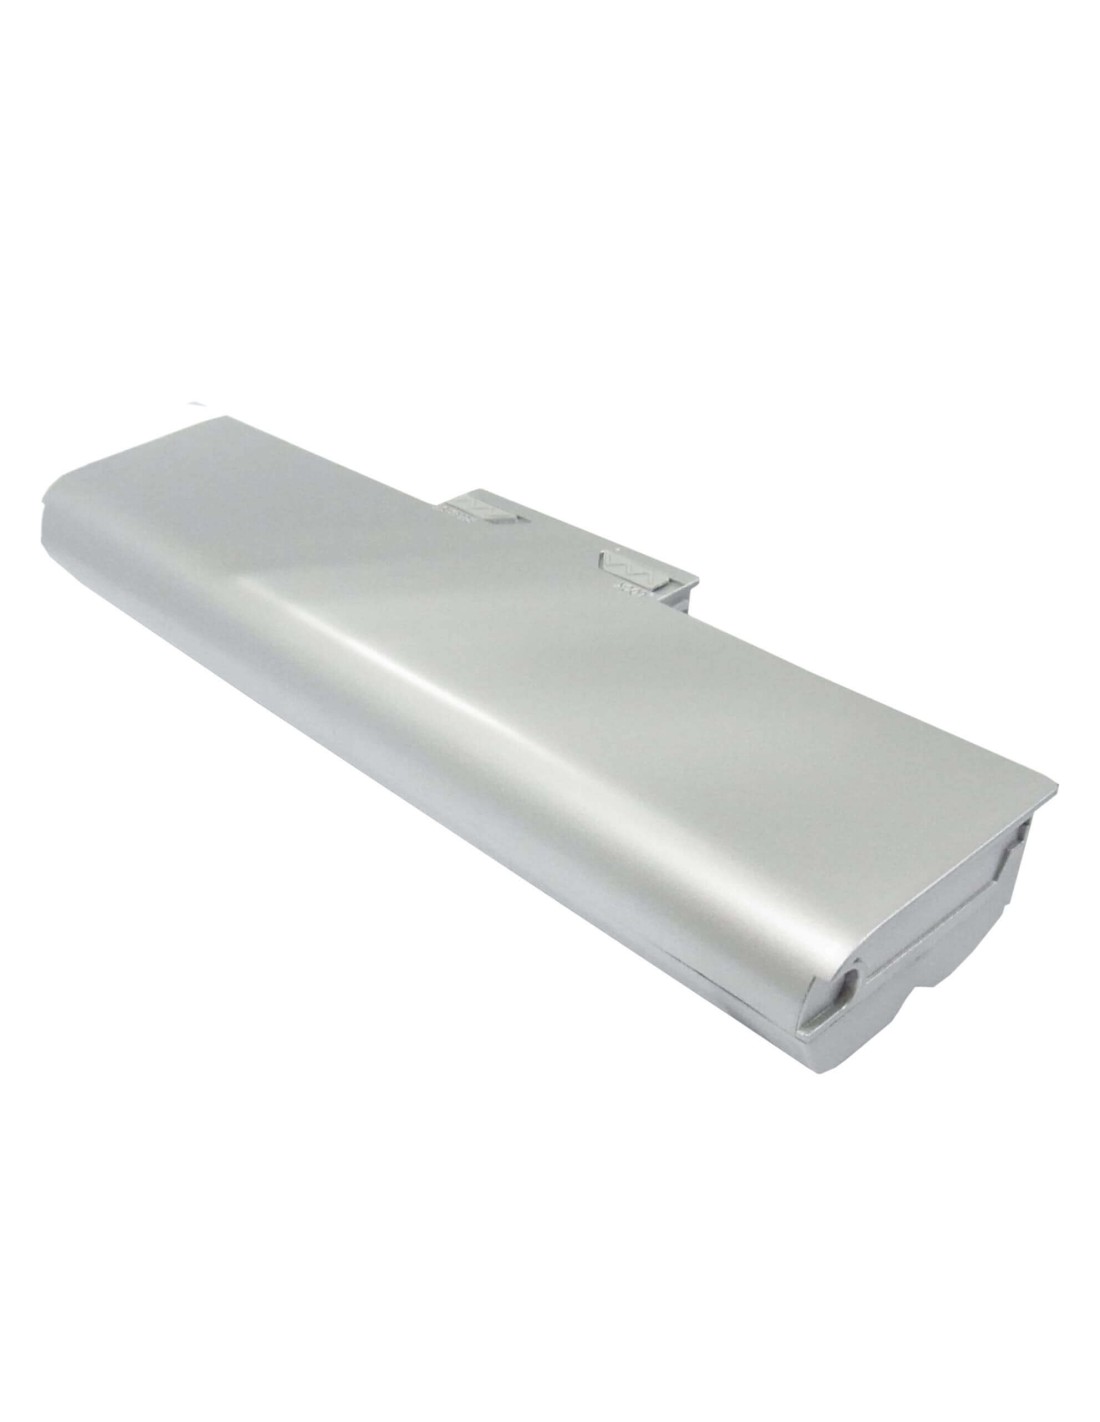 Silver Battery for Sony Vaio Vgn-aw41jf, Vaio Vgn-aw41mf, Vaio Vgn-aw41xh 11.1V, 4400mAh - 48.84Wh